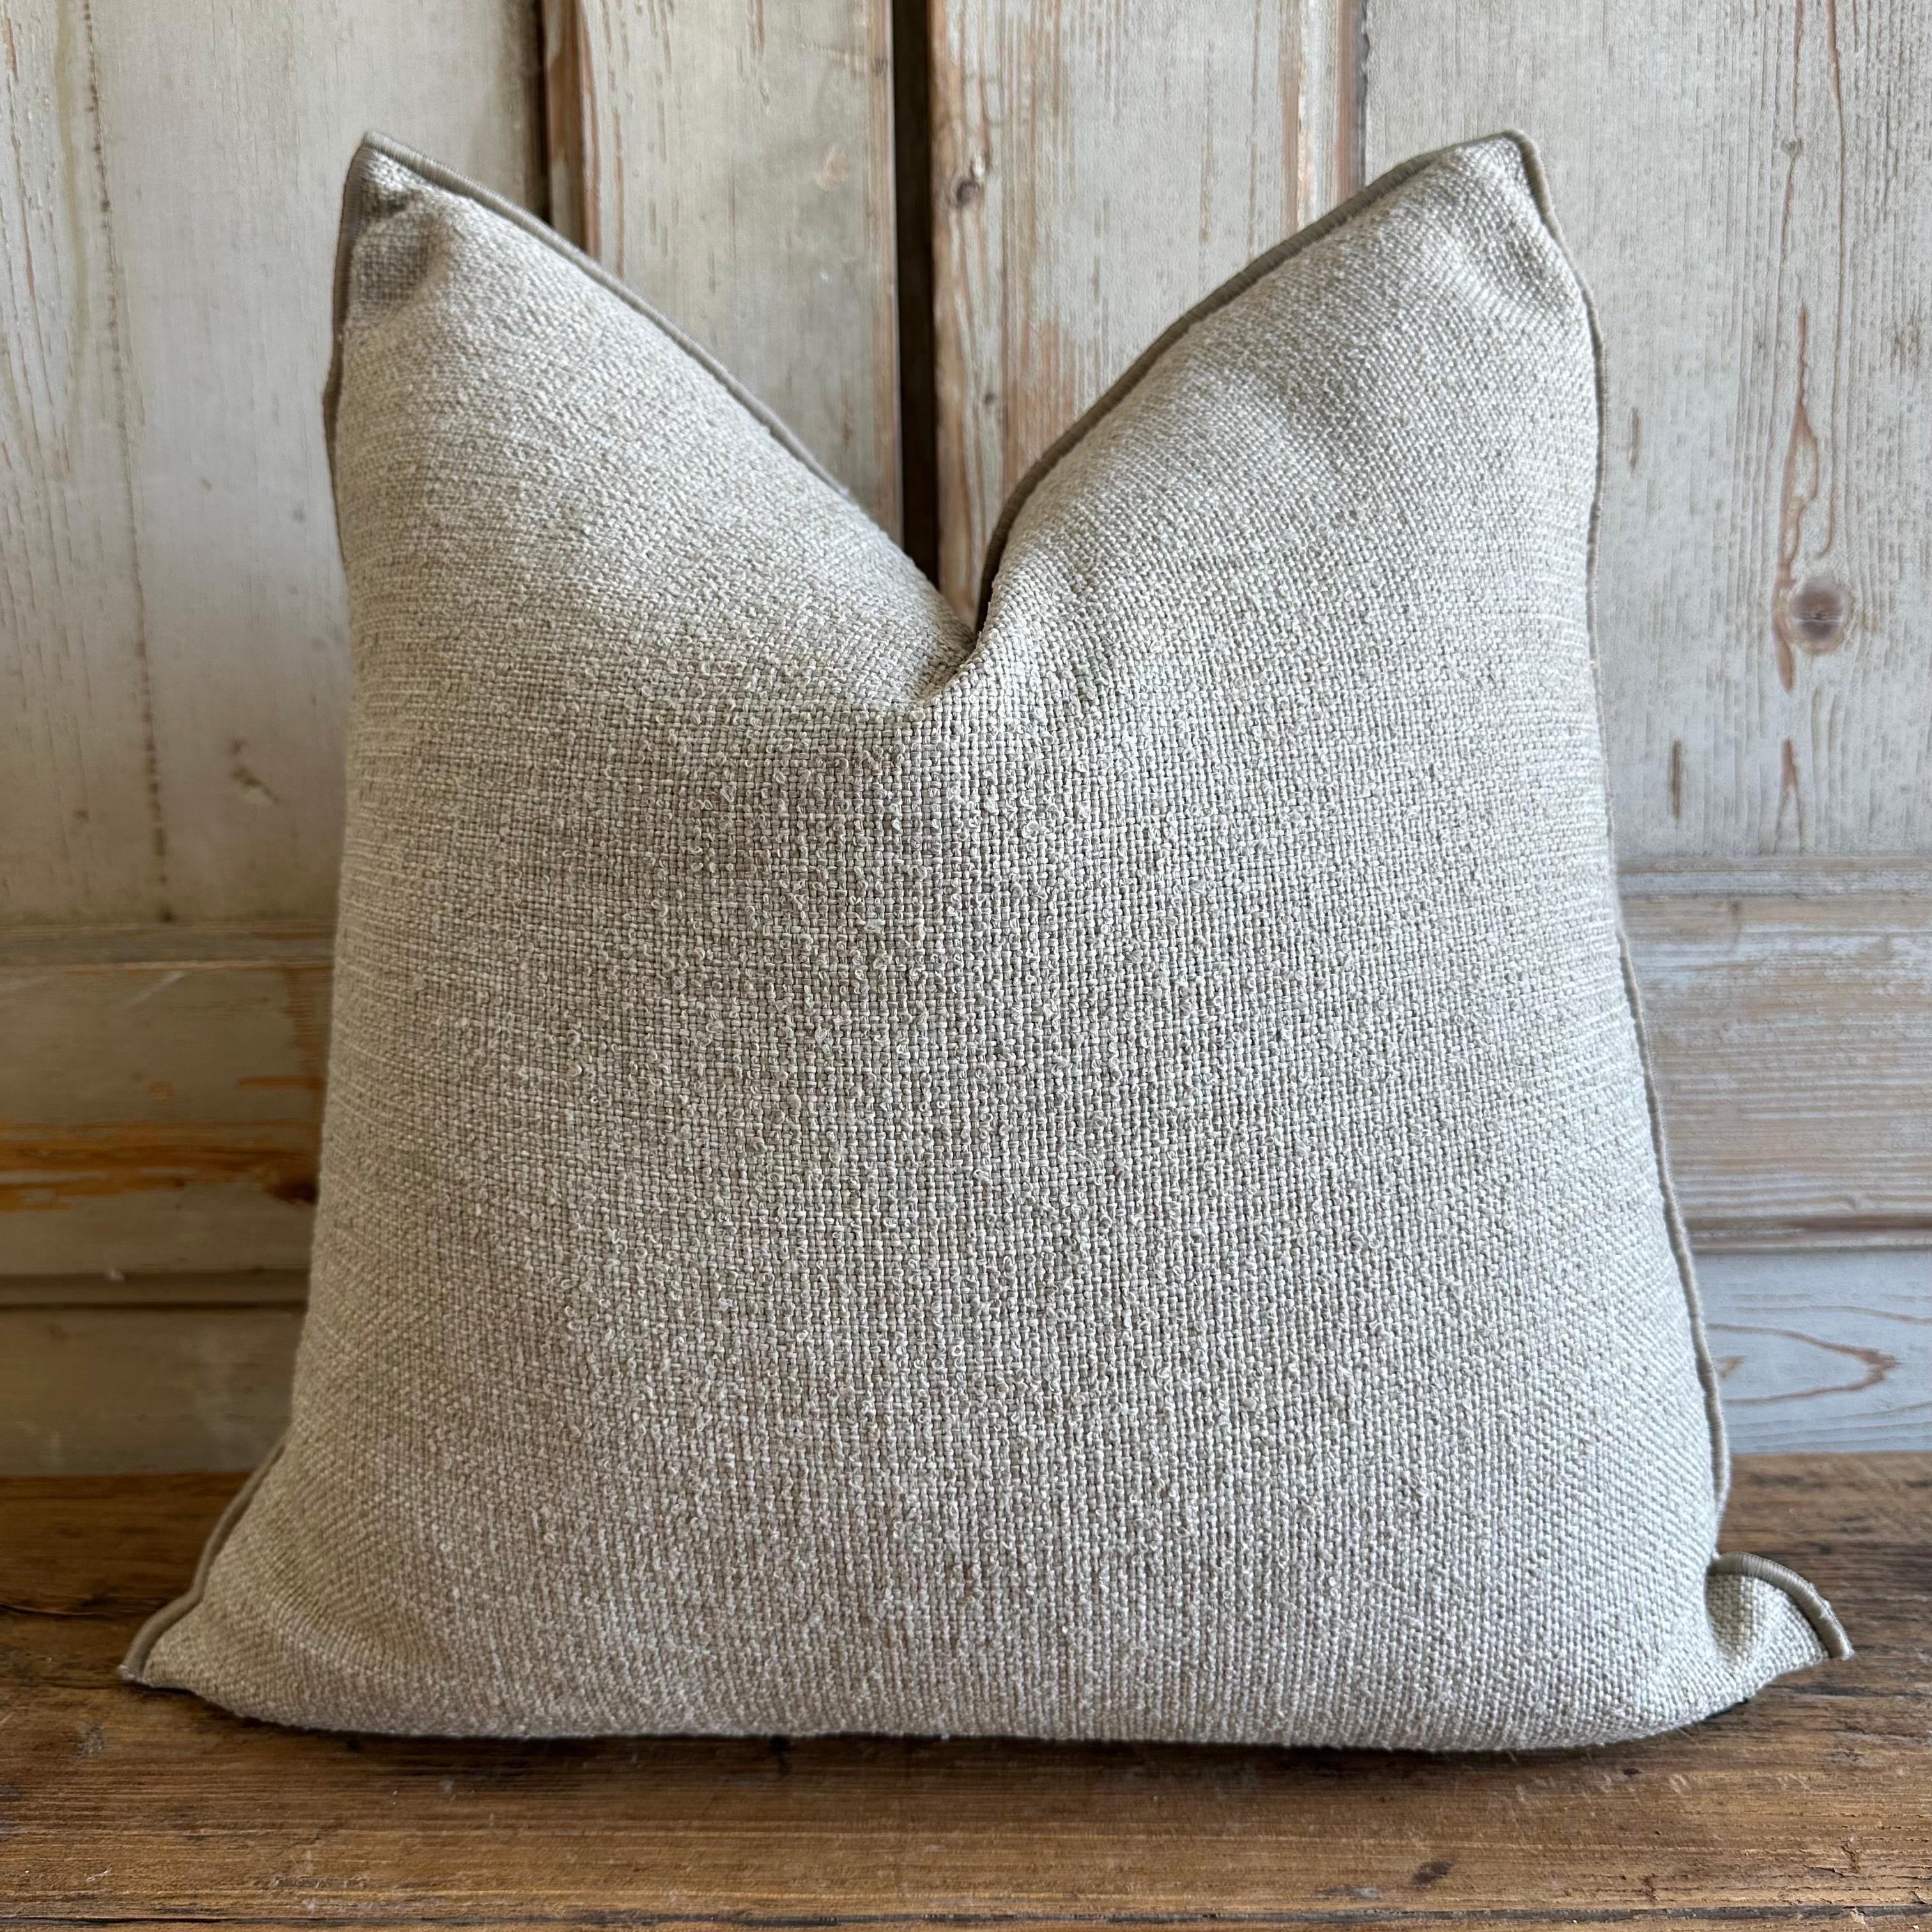 Welcome to bloomhomeinc we stock over 2000 items, please scroll down and click view sellers other items to see more!

Outdoor safe pillows in a natural textured linen fabric.
Size: 20x20
-Zipper closure
-Custom down alternative outdoor safe insert